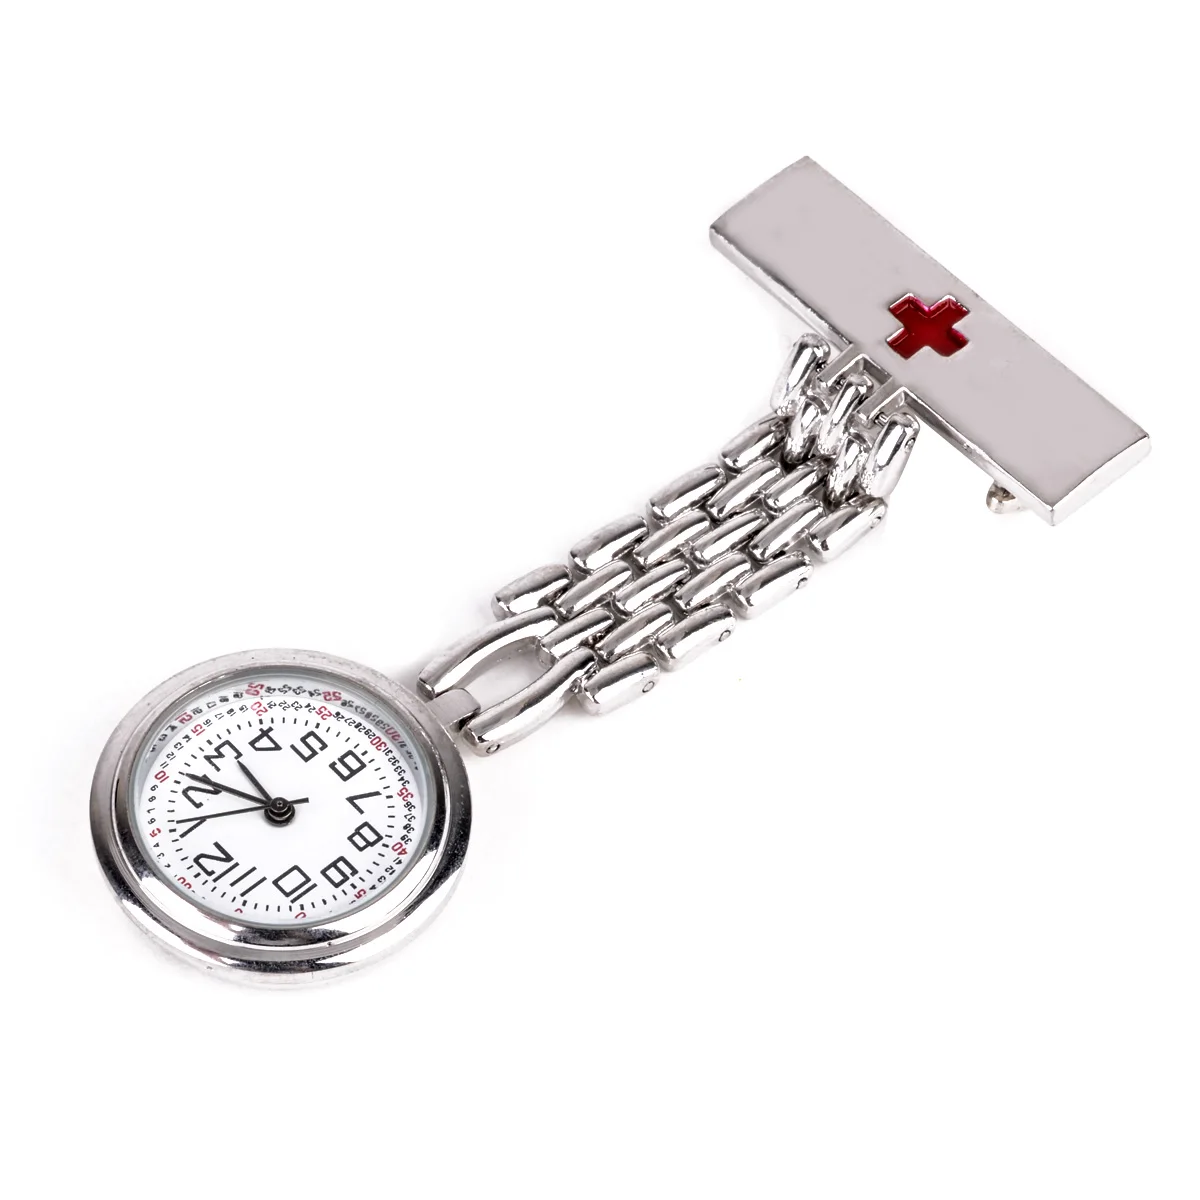 Shellhard Round Dial Red Cross Watches 3 Colors Brooch Fob Quartz Clip on Hanging Medical Pocket Watch